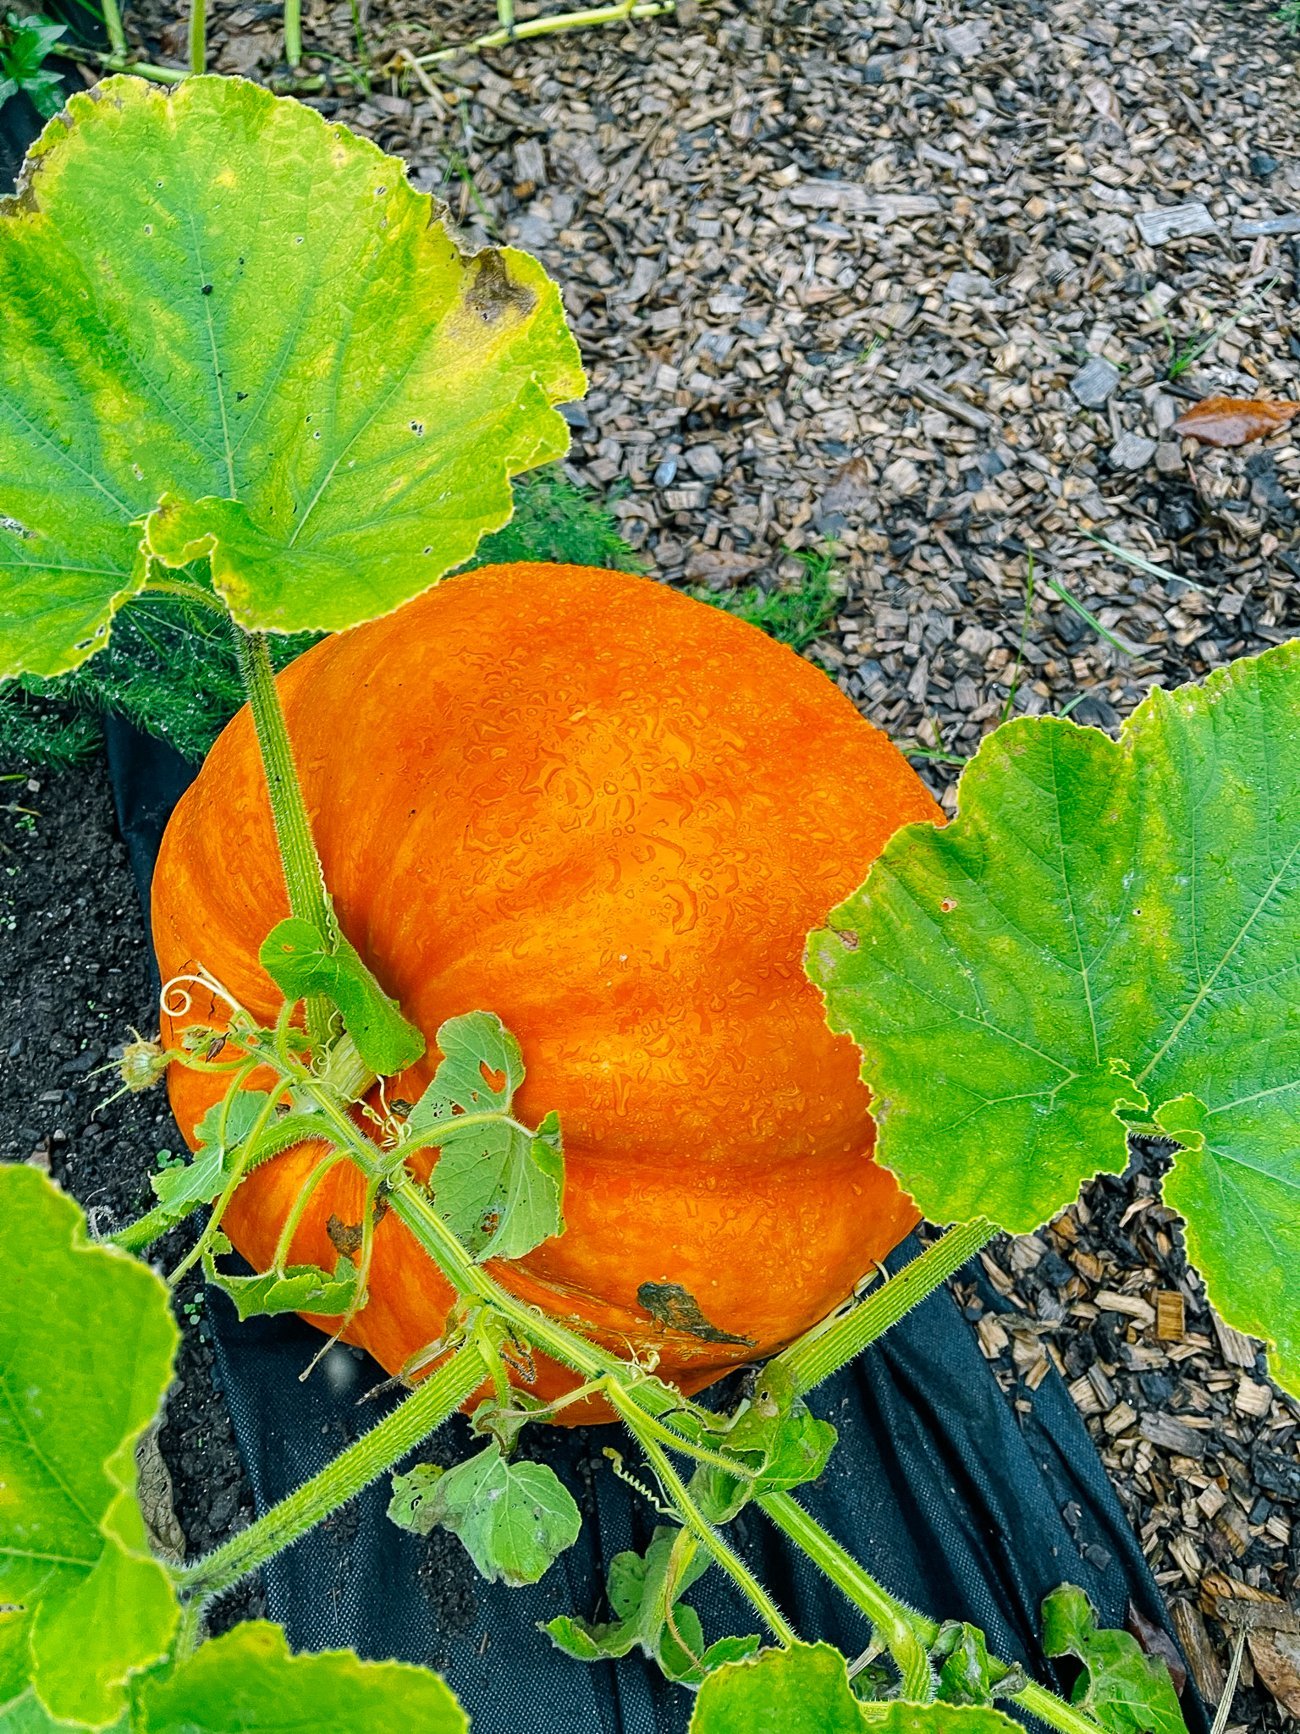 large orange pumpkin ready to be harvested